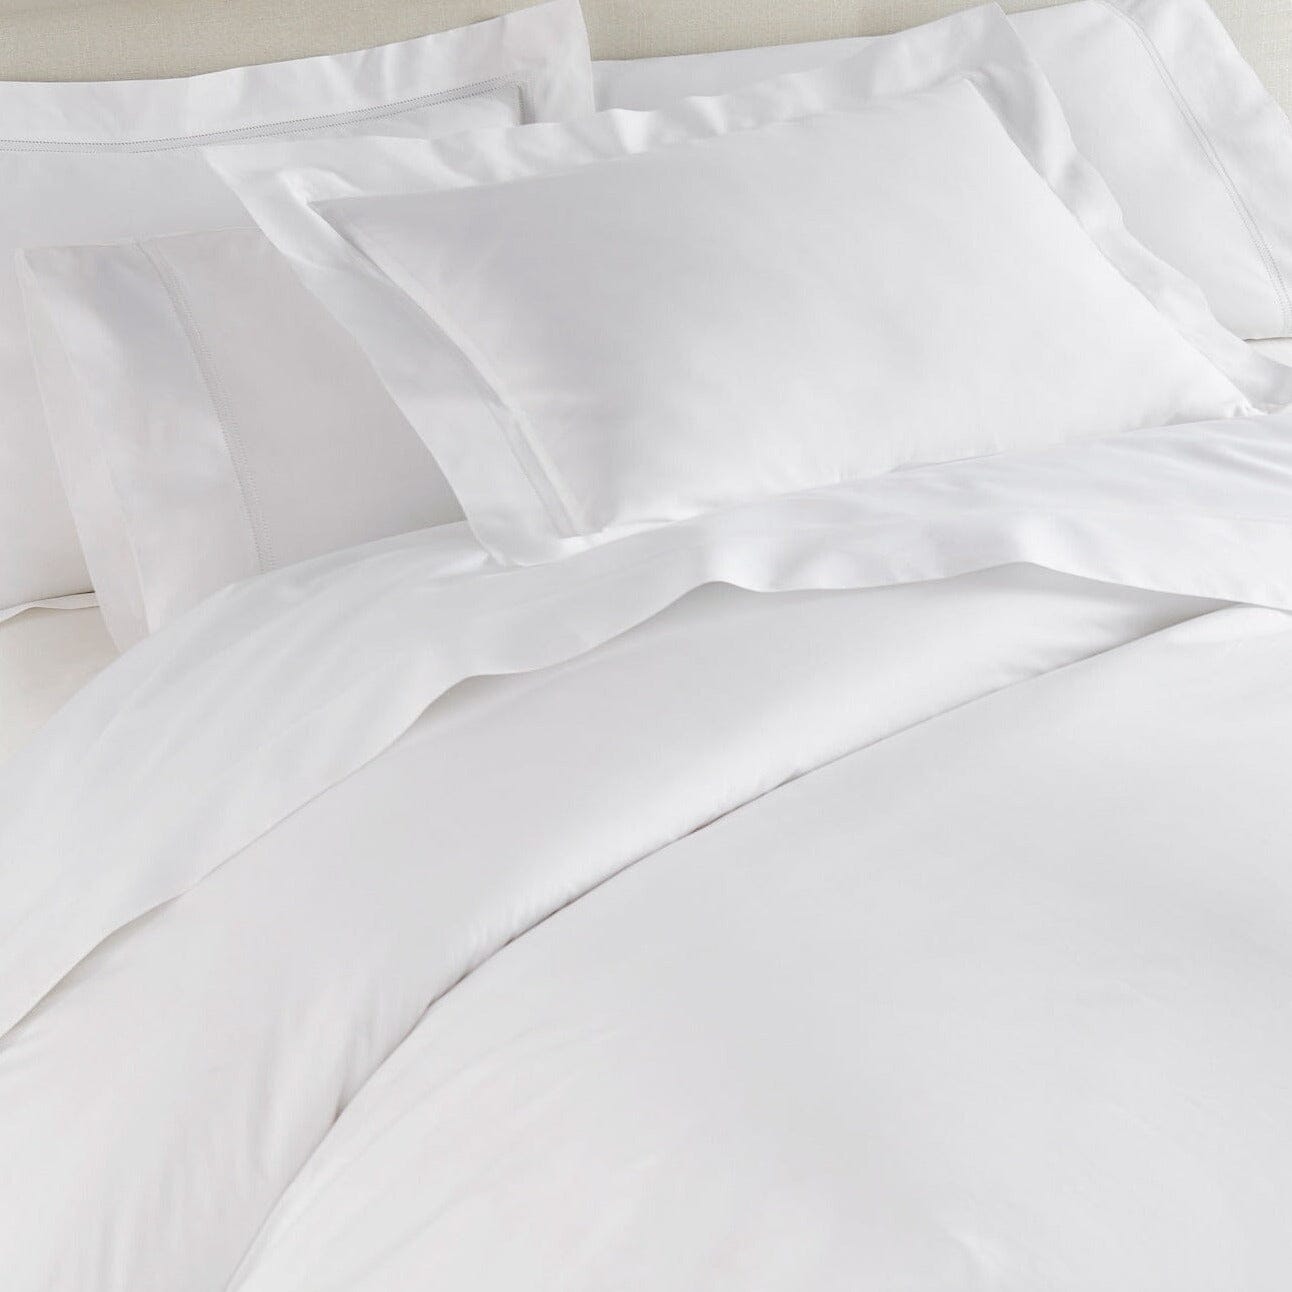 Peacock Alley - Lyric White Bedding - Percale Cotton Pillow shams and Sheet on Bed